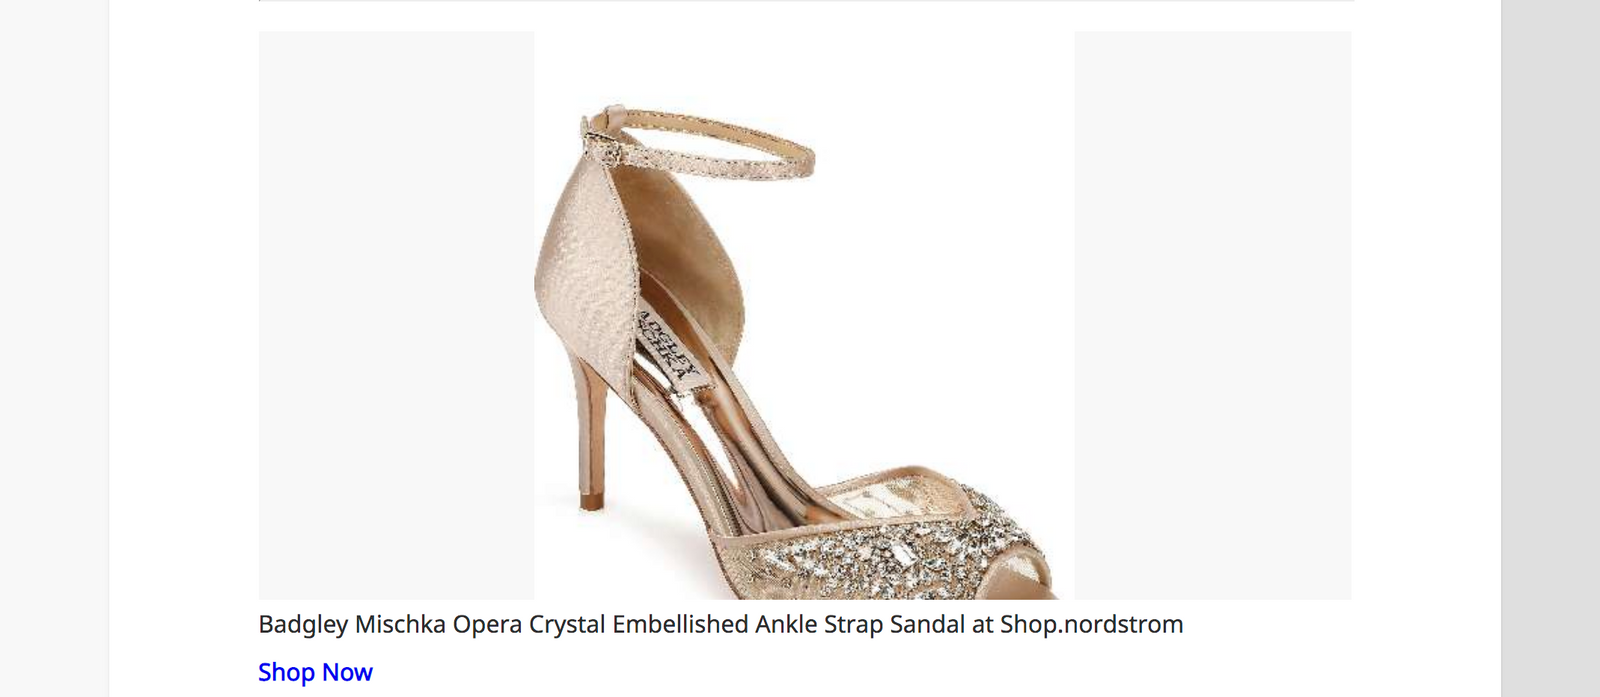 DailyHunt English  IND • Dec 19 • 9:32 pm     Entertainment Mira Rajput wore this metallic gown for Vogue India  Badgley Mischka Opera Crystal Embellished Ankle Strap Sandal at...